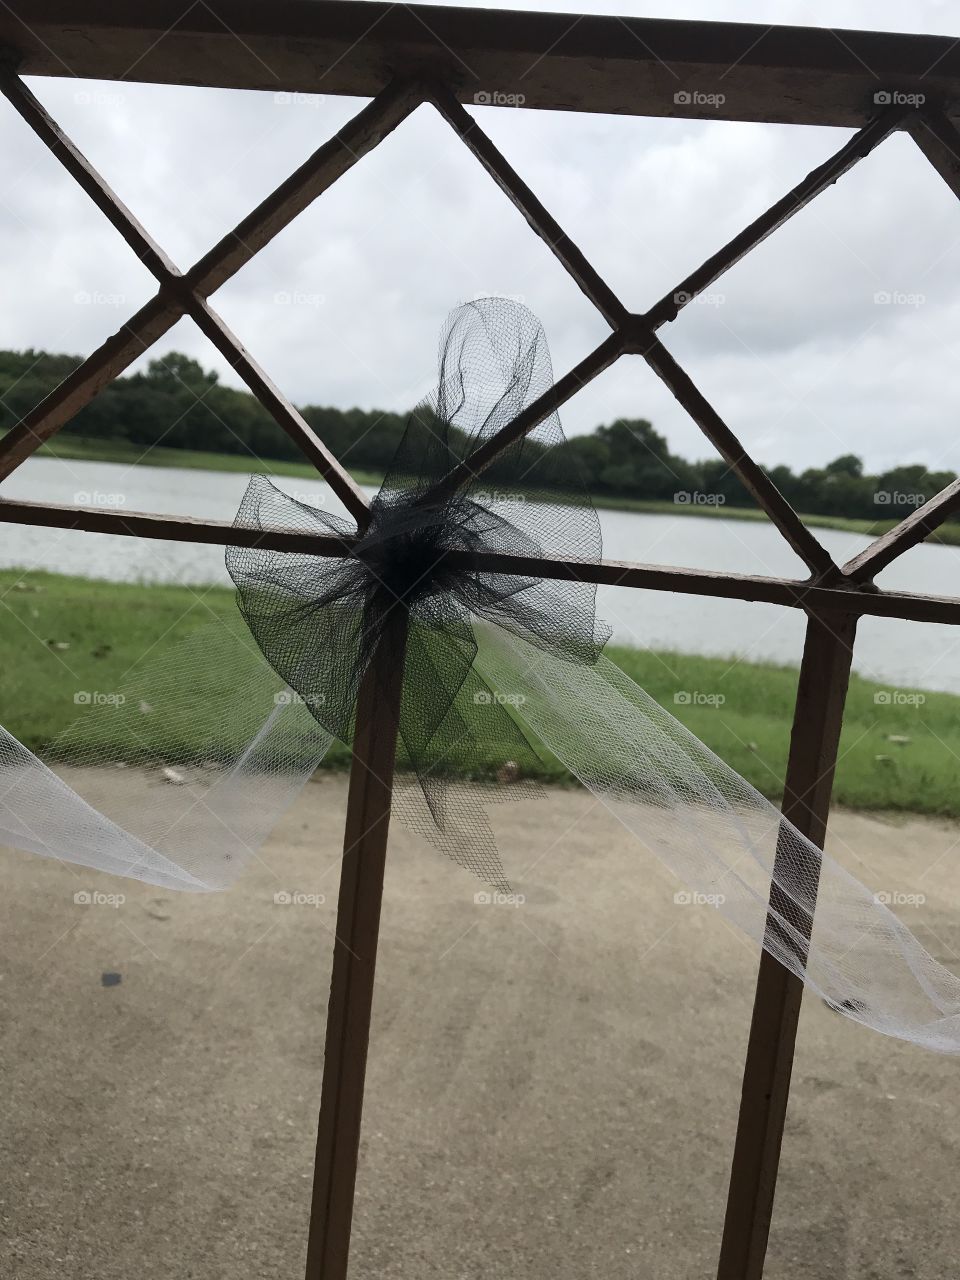 Tulle in the wind